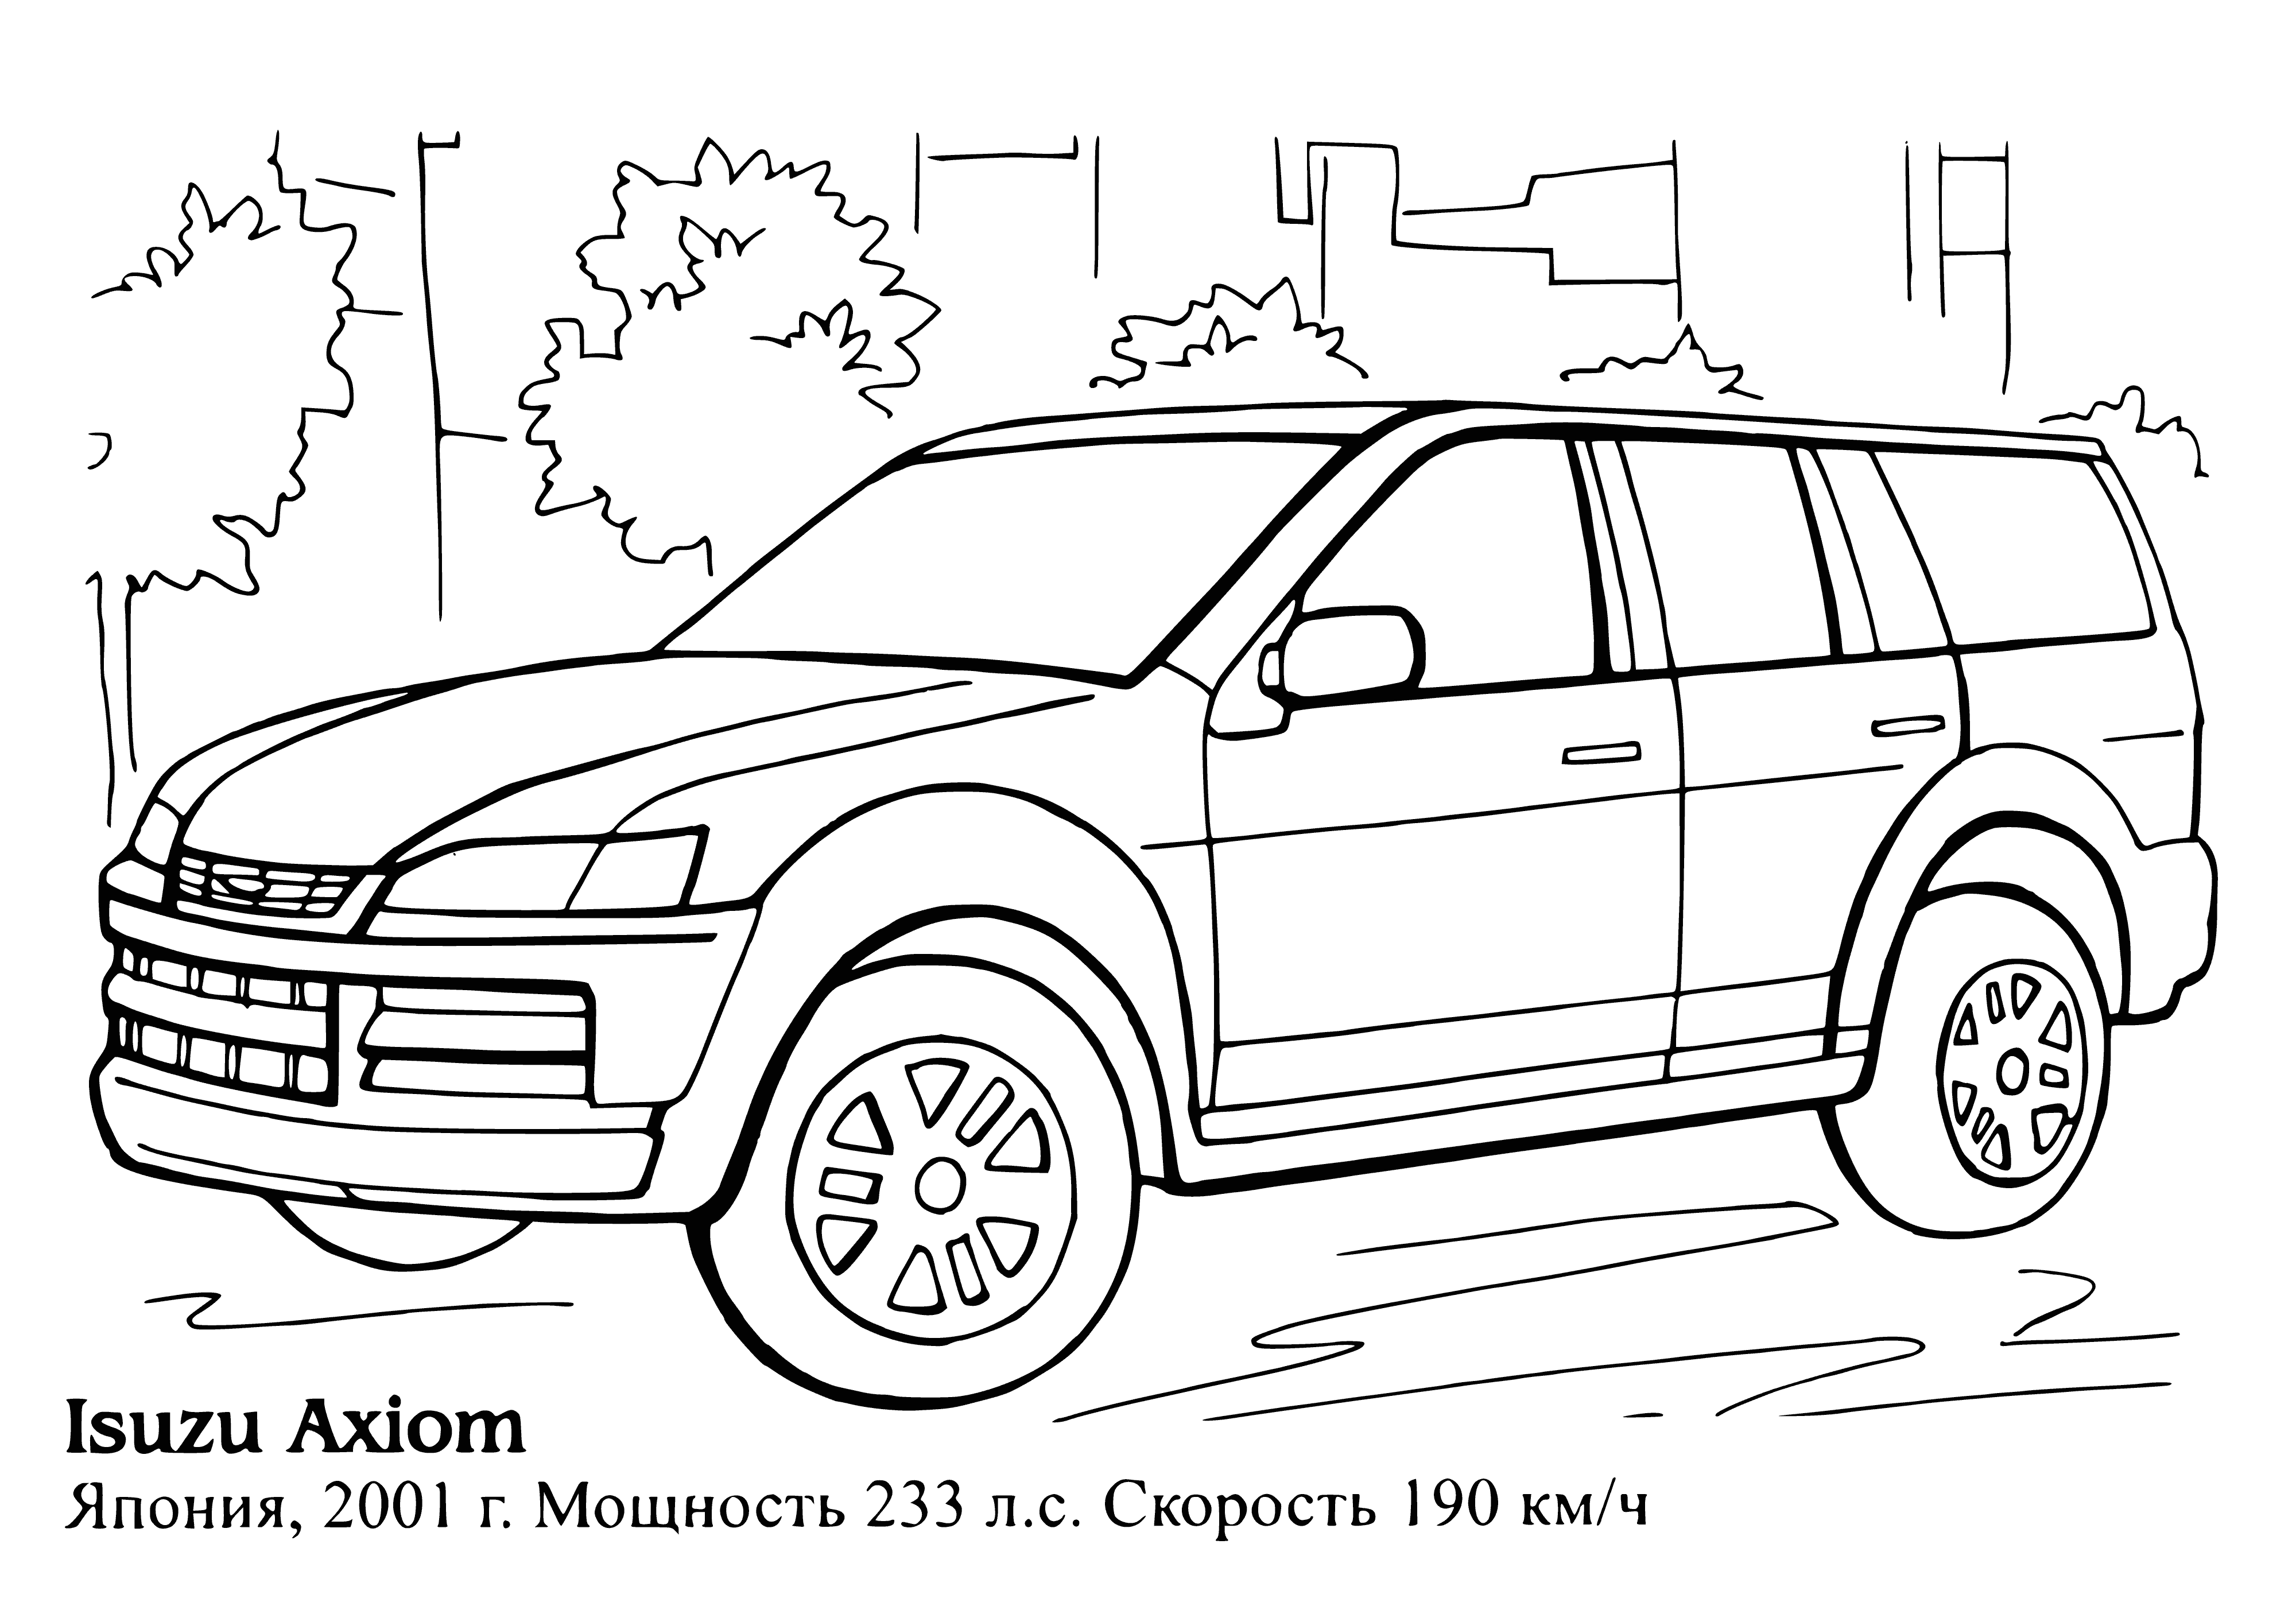 coloring page: An empty blue SUV with four doors, tinted windows, and a spoiler sits in a grassy area with trees.